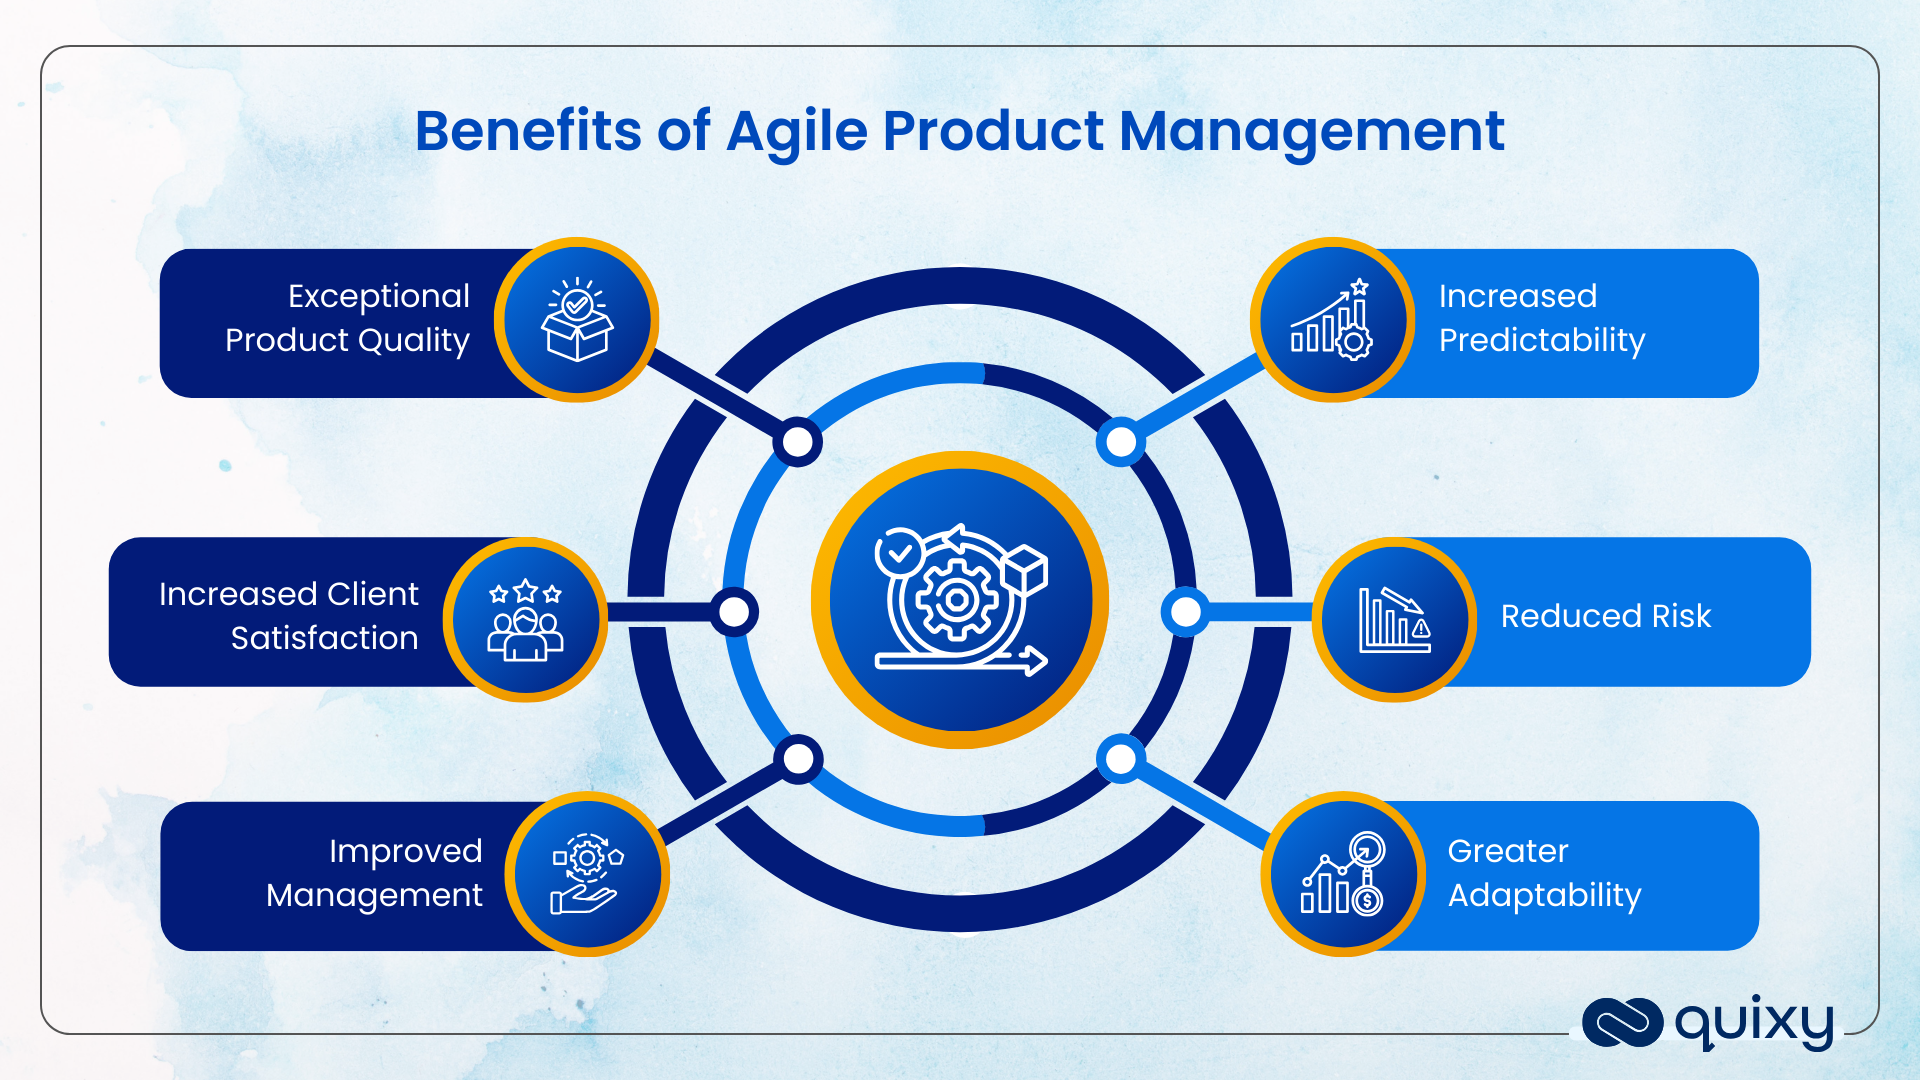 Benefits of Agile Product Management